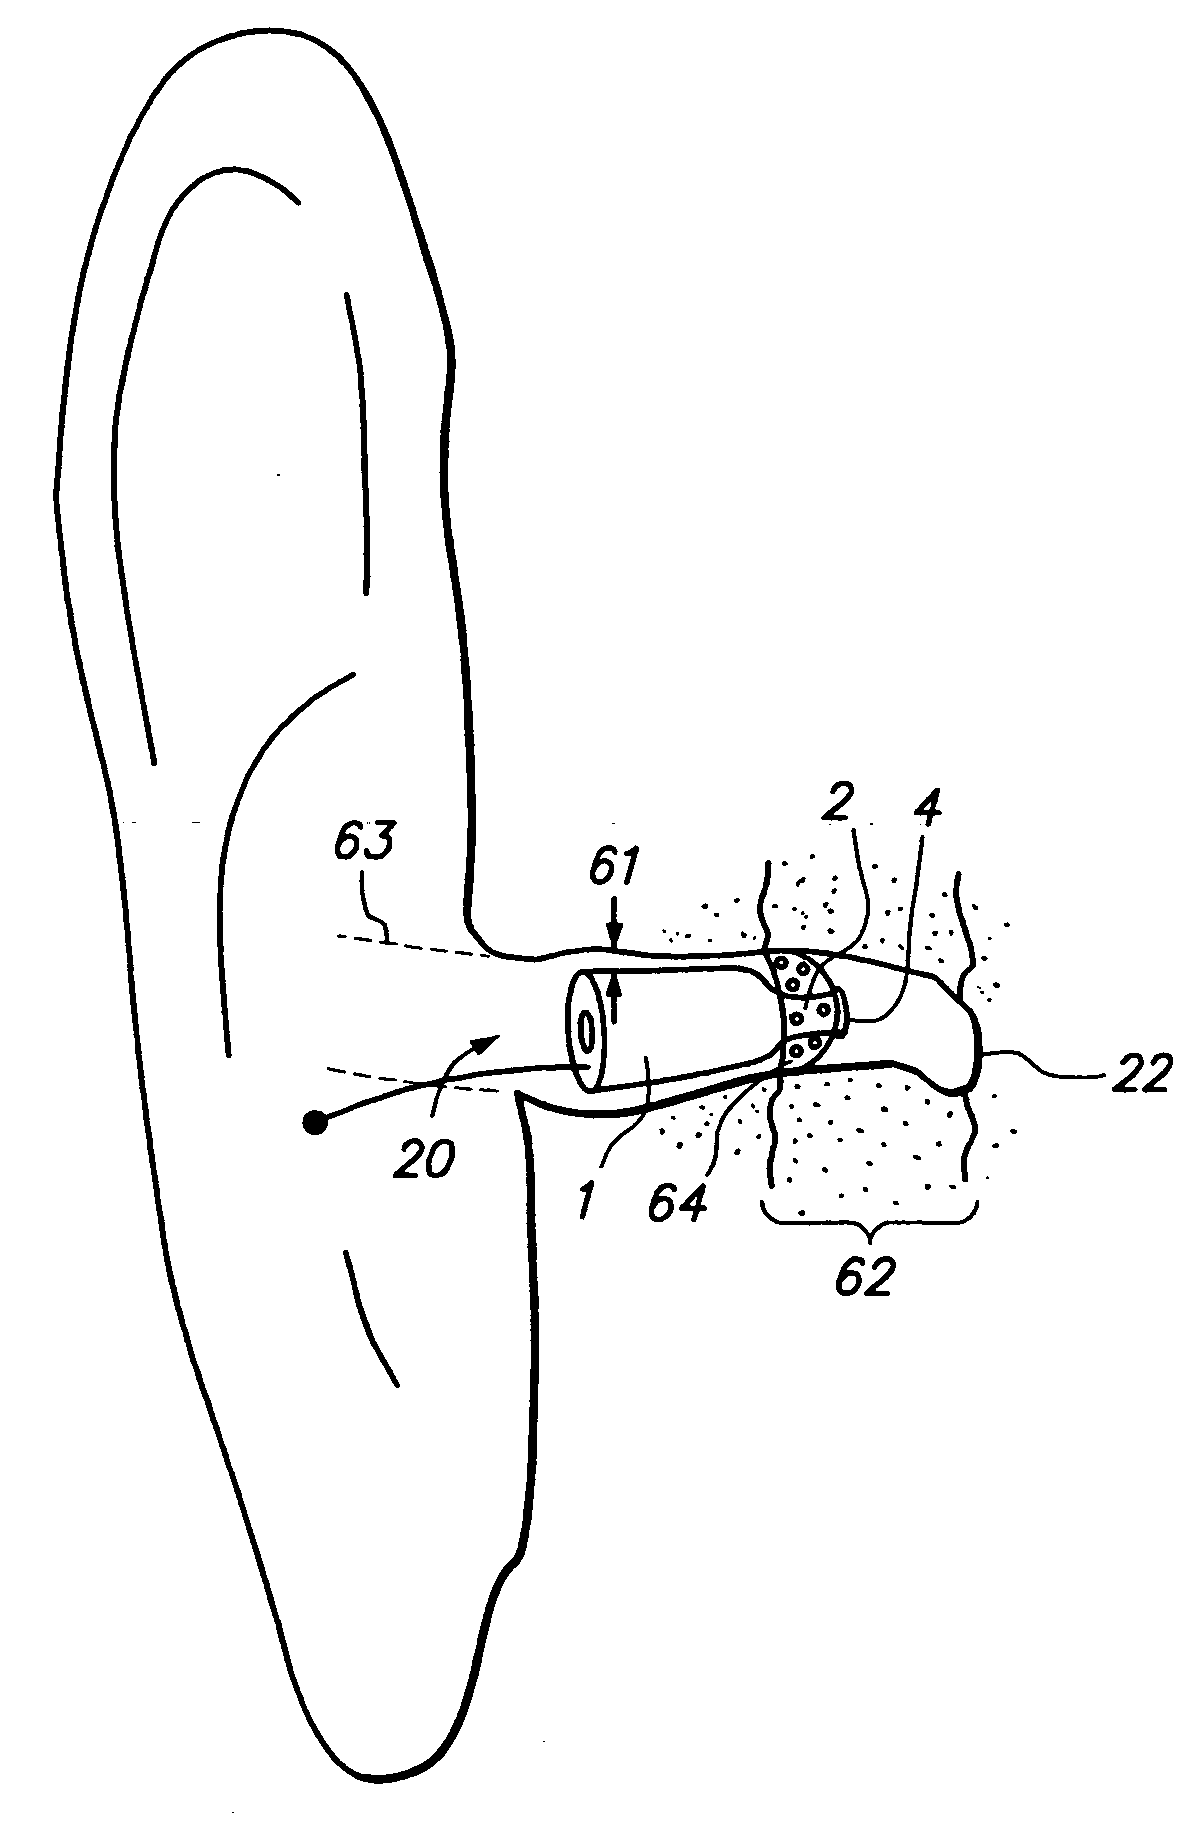 Open fit canal hearing device